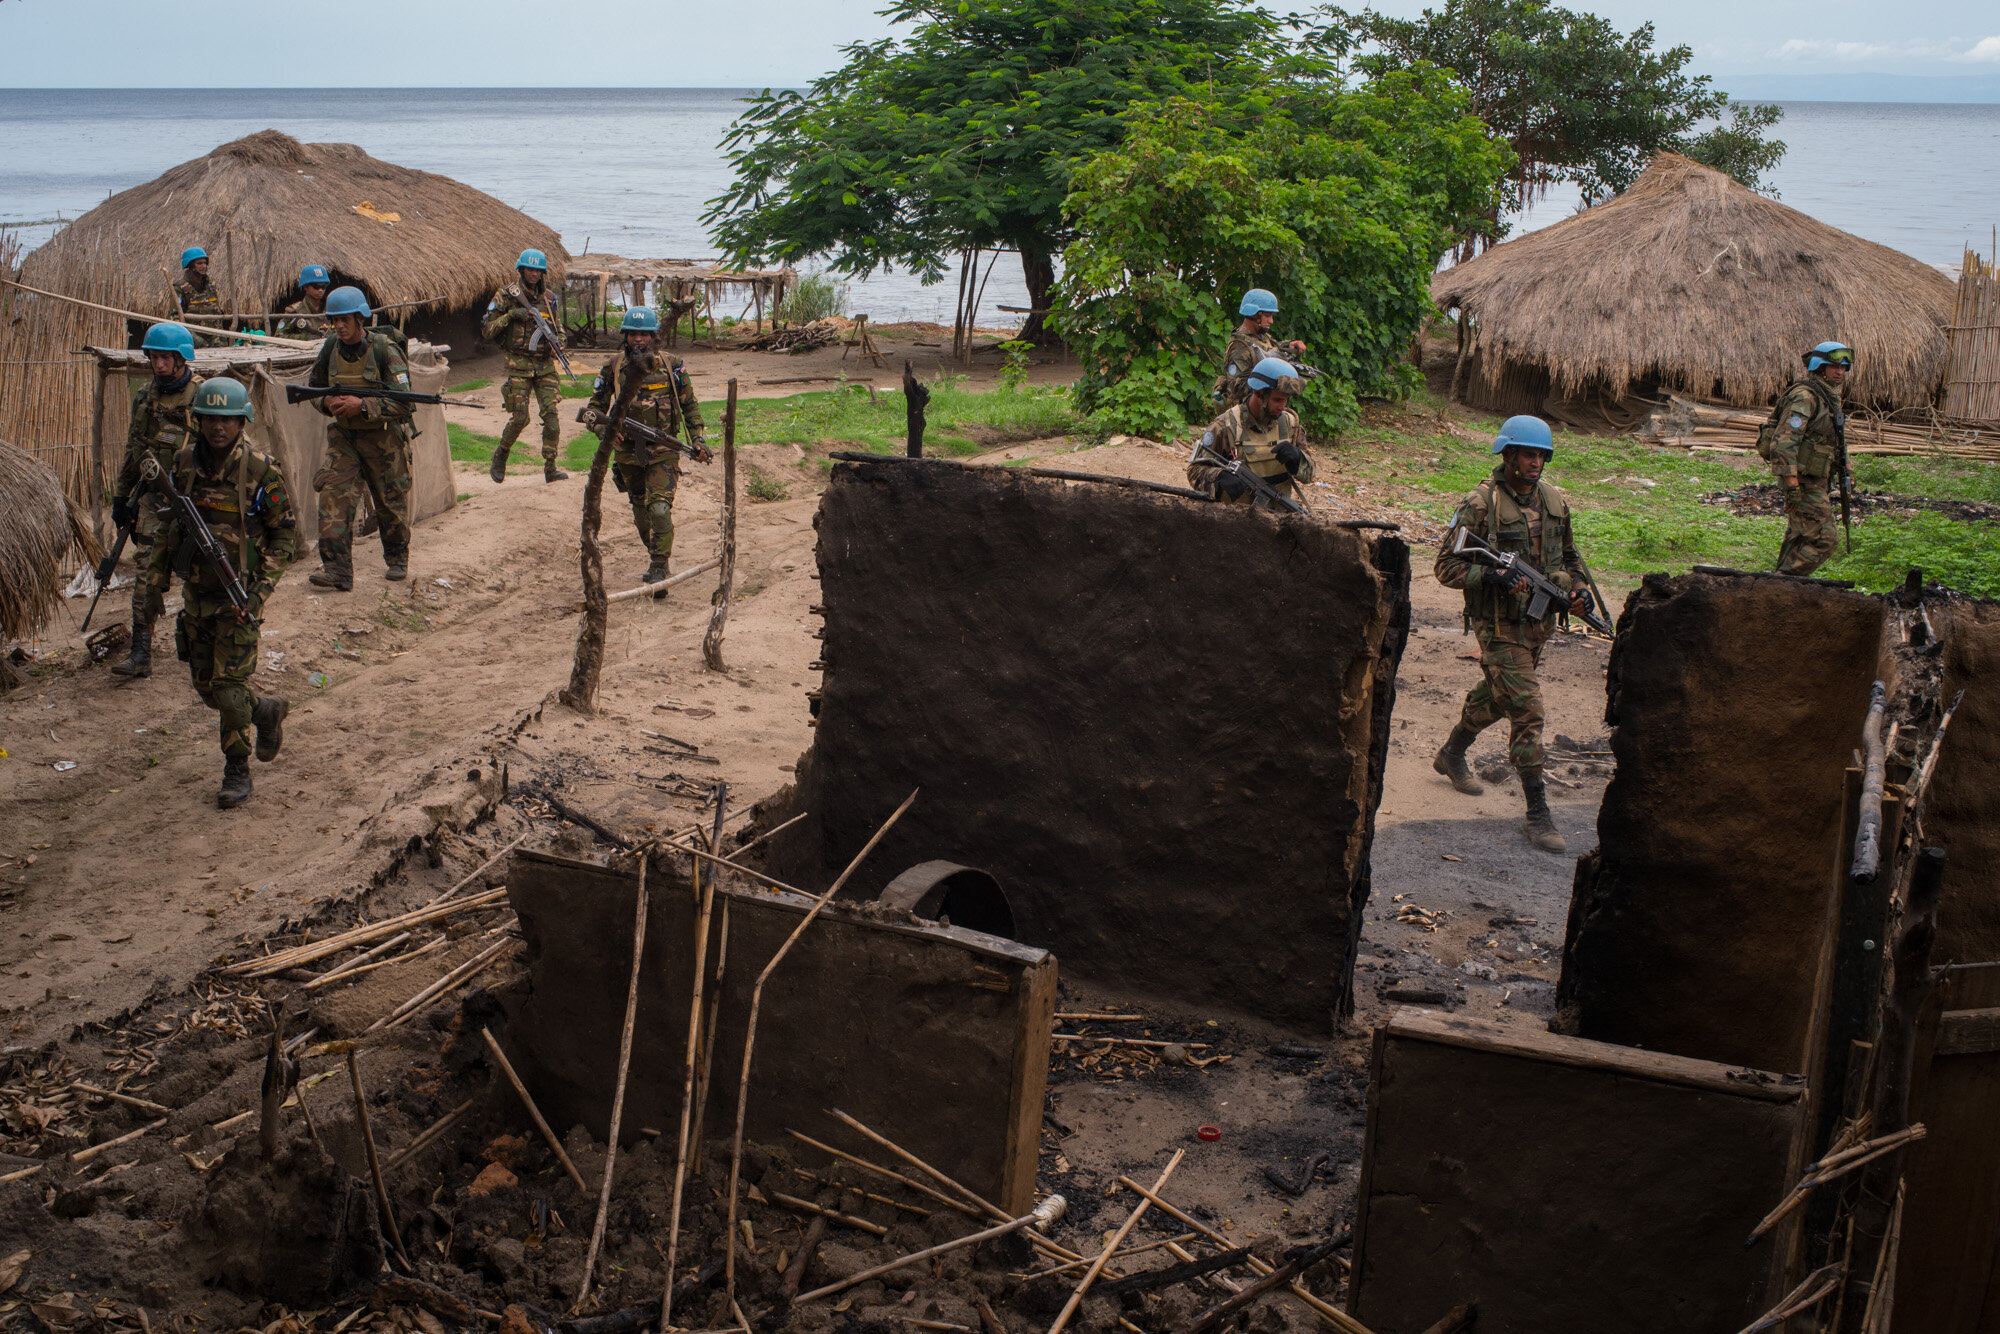  Soldiers from the Armed Forces of the DRC, and UN peacekeeprs from the Uruguyan and Bangladesh batallions move through Ghat, a deserted lakeside village that lies in ruins after attacks from militias less than a week prior. They have come here to me